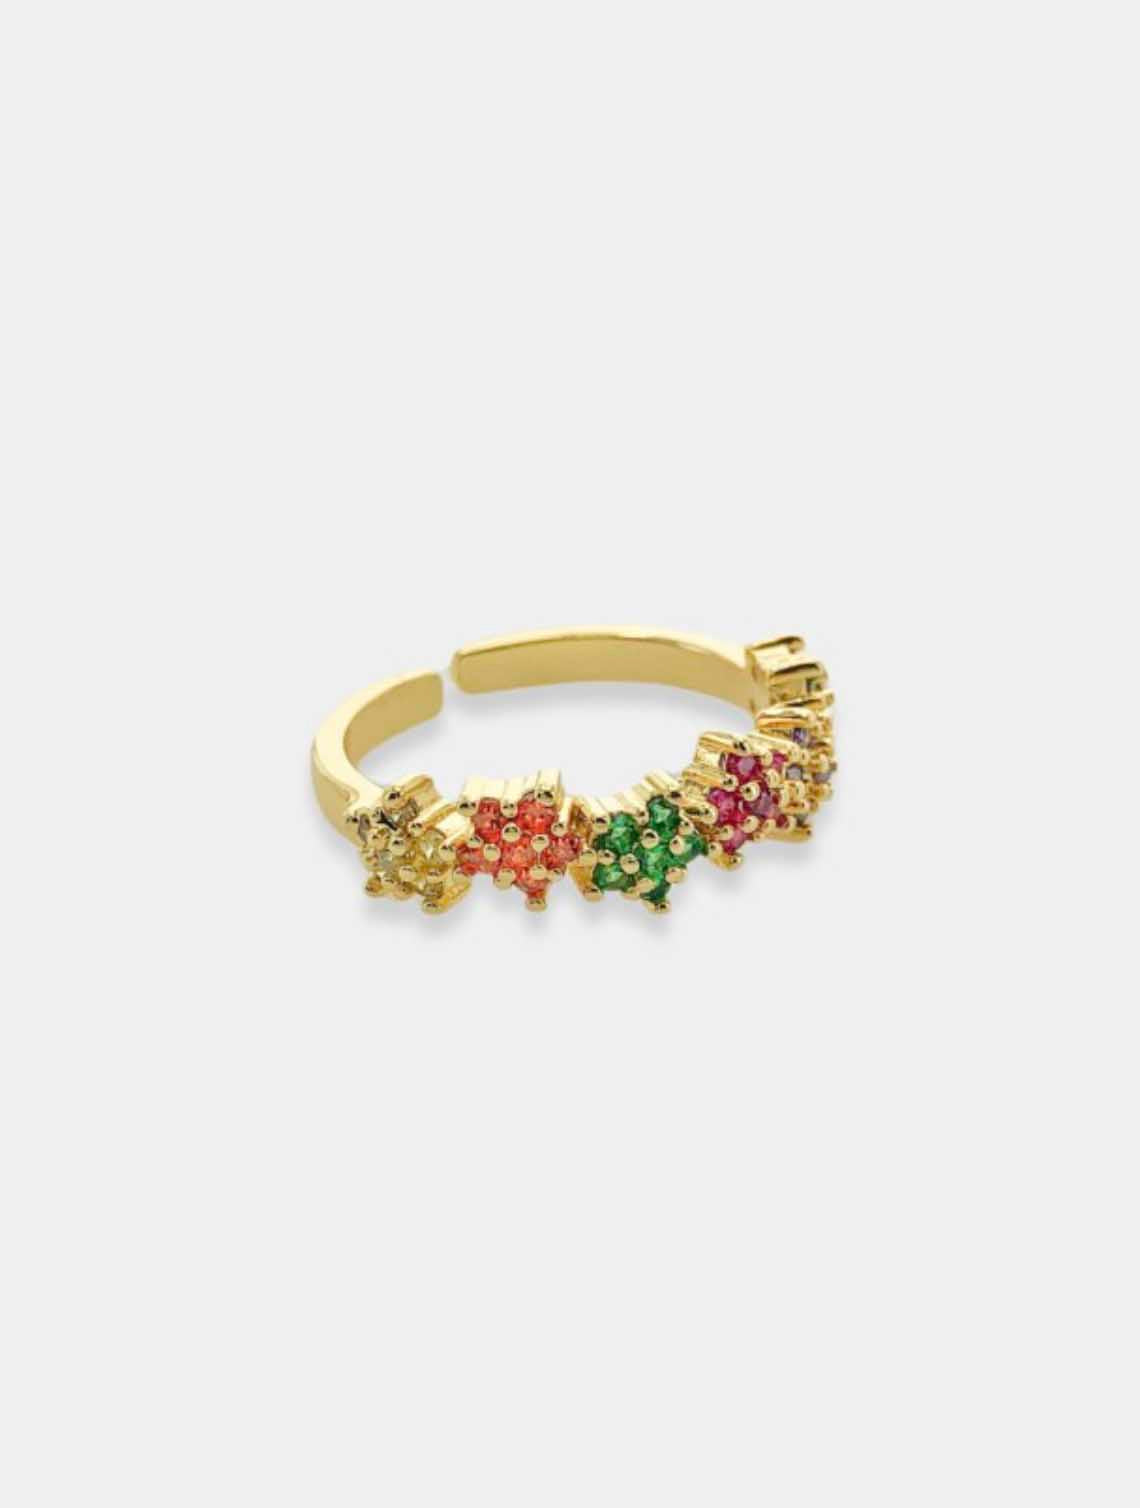 Multi Colored Flower Ring in Gold